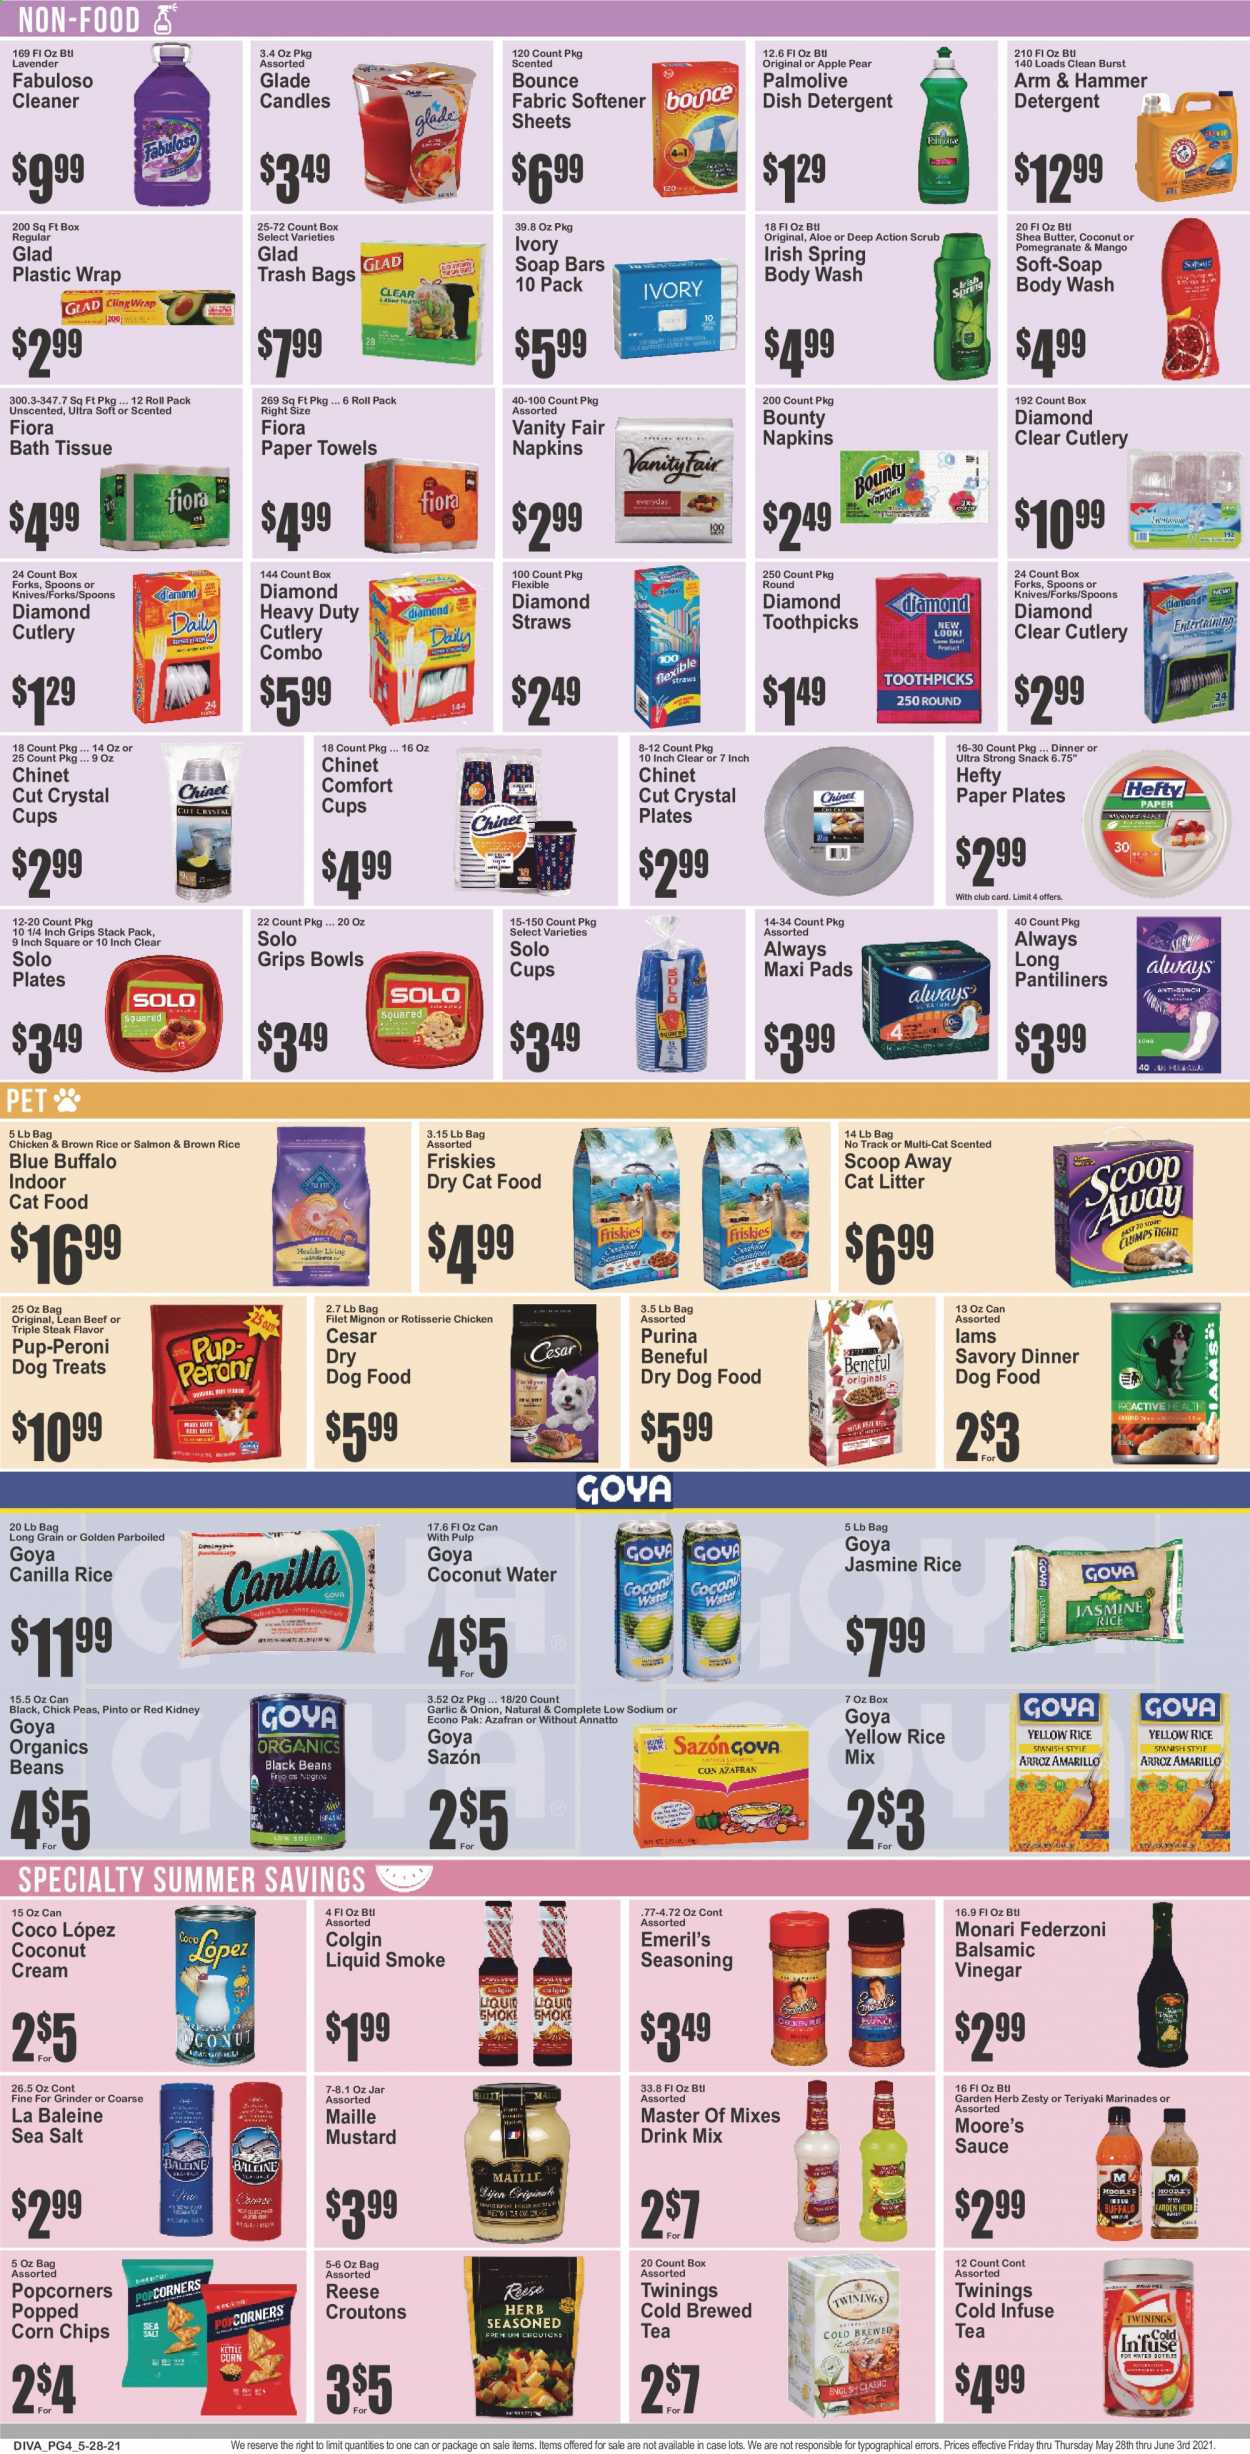 thumbnail - Key Food Flyer - 05/28/2021 - 06/03/2021 - Sales products - beans, pears, chicken roast, sauce, snack, Bounty, chips, corn chips, popcorn, ARM & HAMMER, croutons, Goya, brown rice, jasmine rice, spice, herbs, liquid smoke, mustard, balsamic vinegar, coconut water, tea, Twinings, beef meat, steak, beef tenderloin, napkins, bath tissue, kitchen towels, paper towels, detergent, cleaner, Fabuloso, fabric softener, Bounce, body wash, Palmolive, soap, pantiliners, sanitary pads, shea butter, Hefty, trash bags, knife, spoon, plate, cup, straw, candle, Glade, paper plate, cat litter, animal food, Blue Buffalo, cat food, dog food, Purina, dry dog food, dry cat food, Pup-Peroni, Friskies, Iams. Page 4.